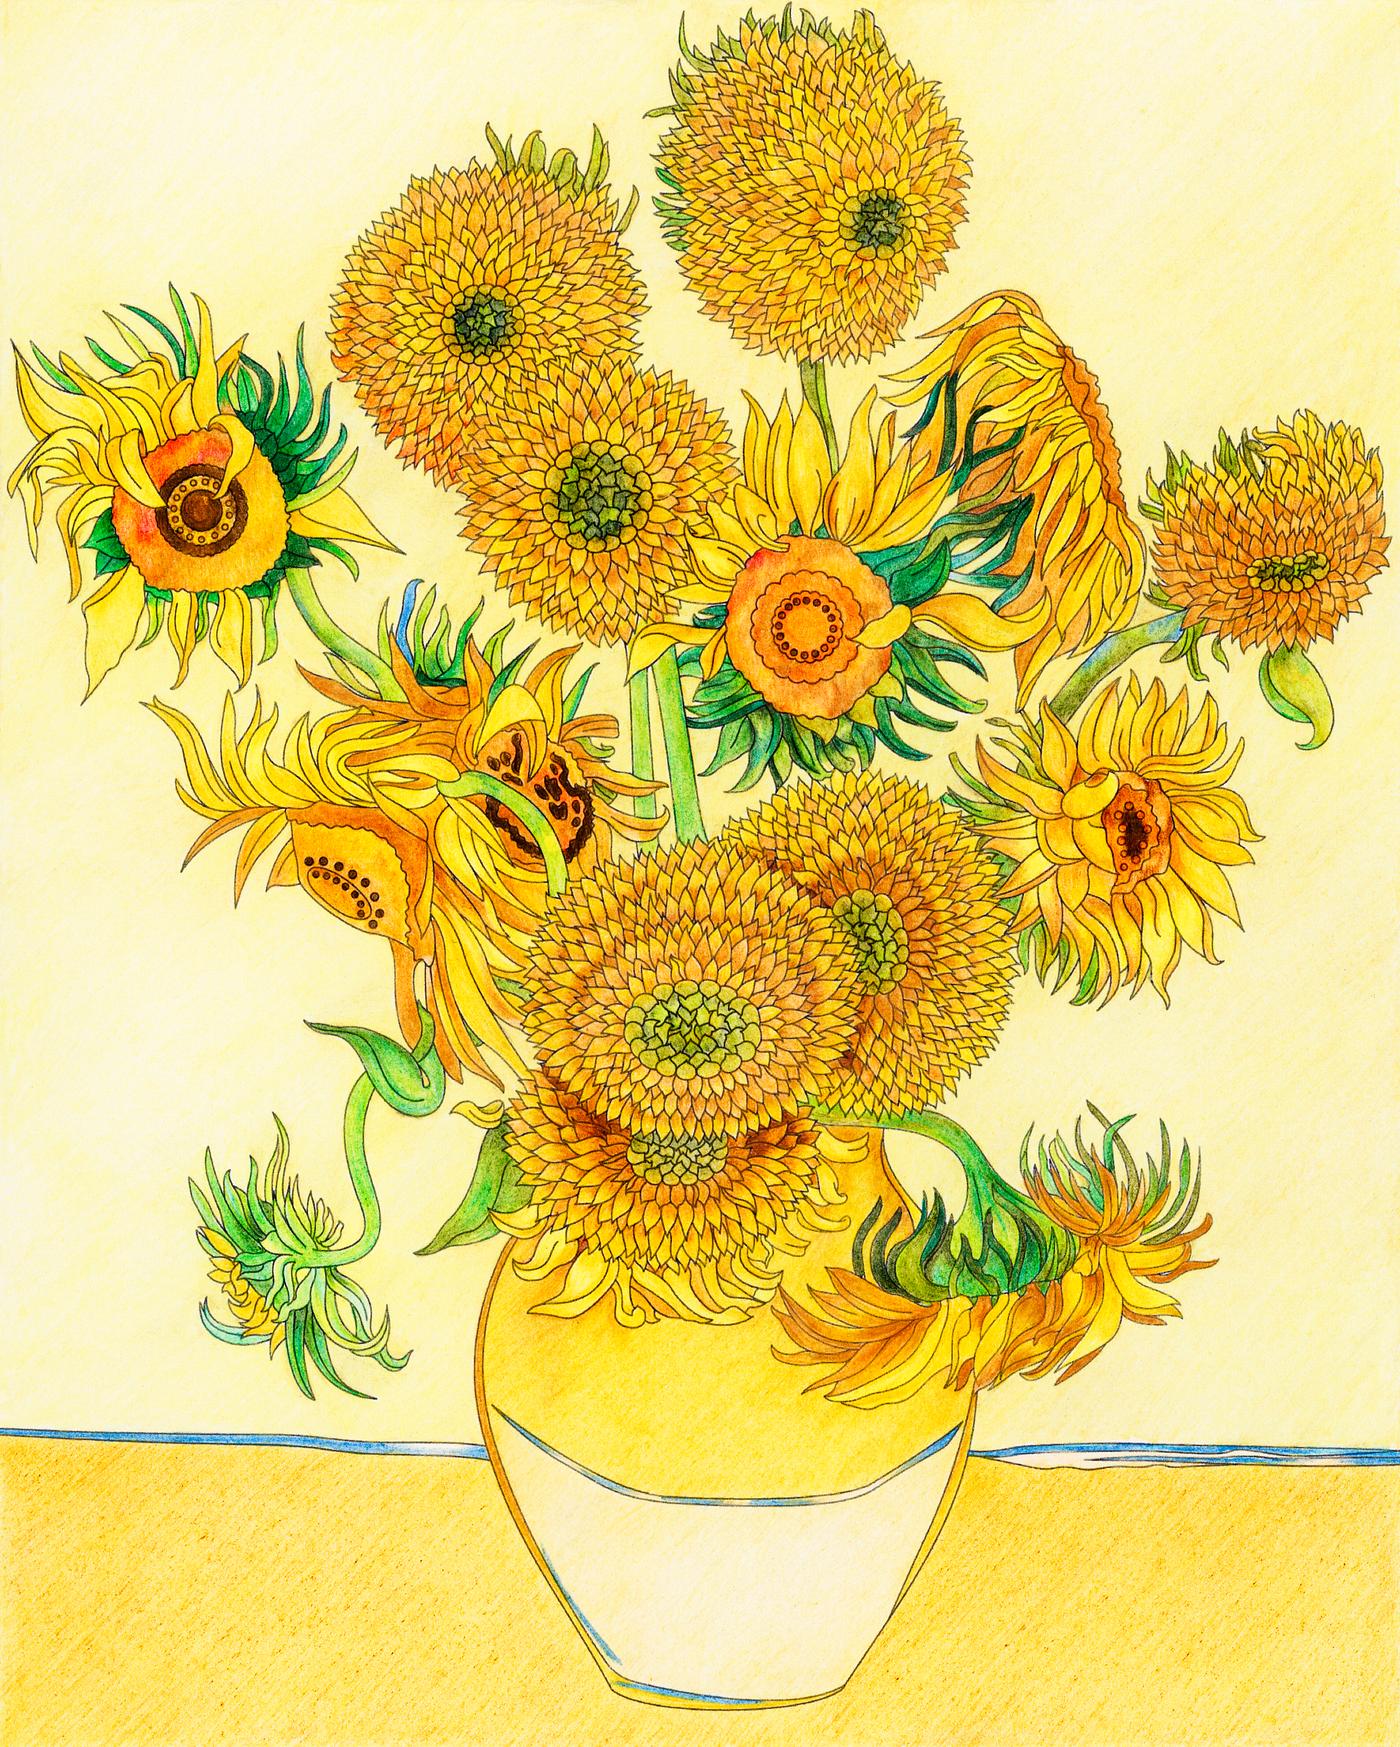 Sunflowers (1889) by Vincent van Gogh: adult coloring page | Free stock